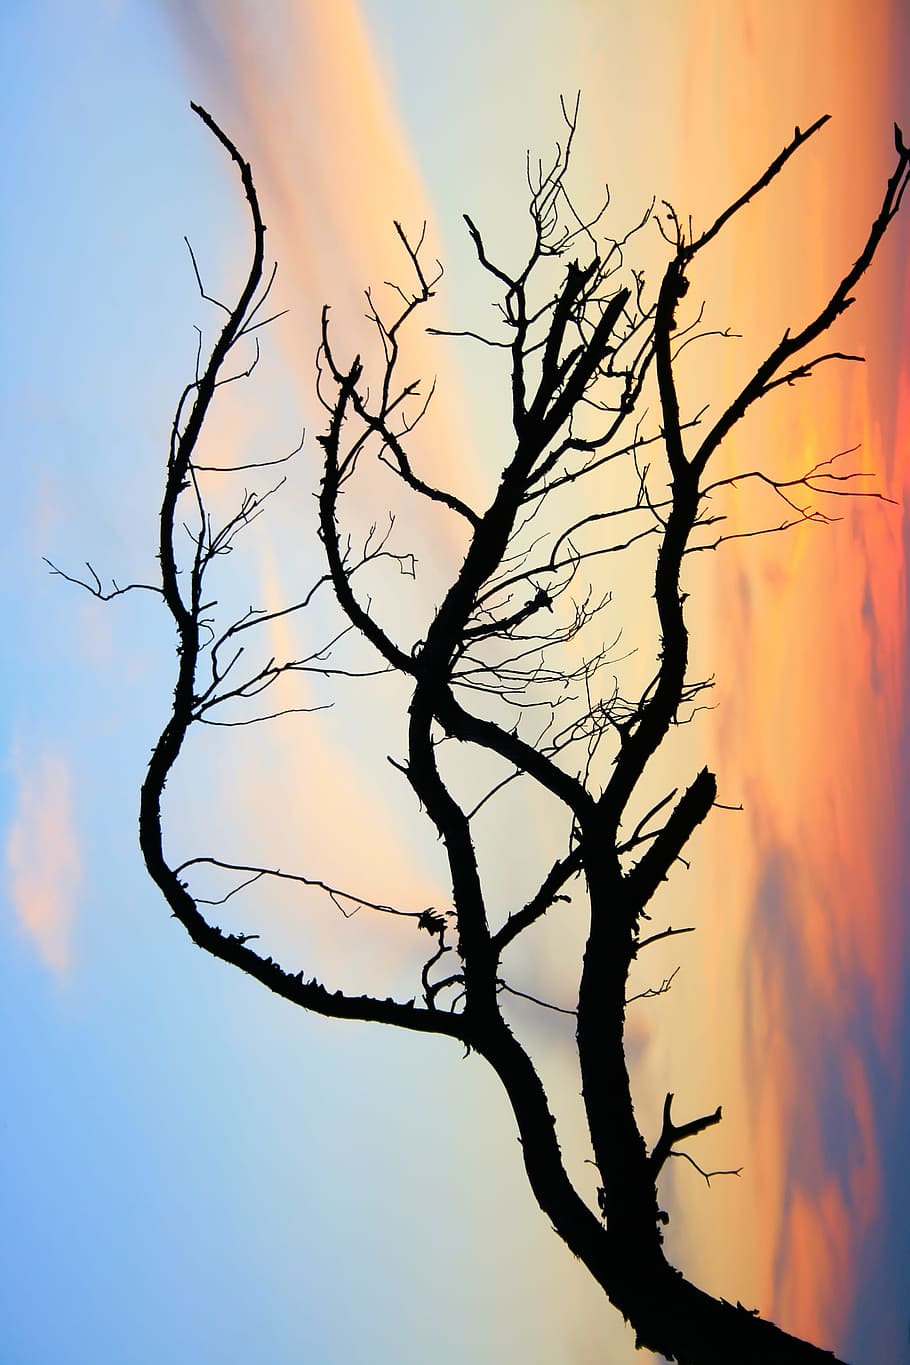 branch, bare, tree, sky, clouds, silhouette, beauty in nature, sunset, tranquility, bare tree